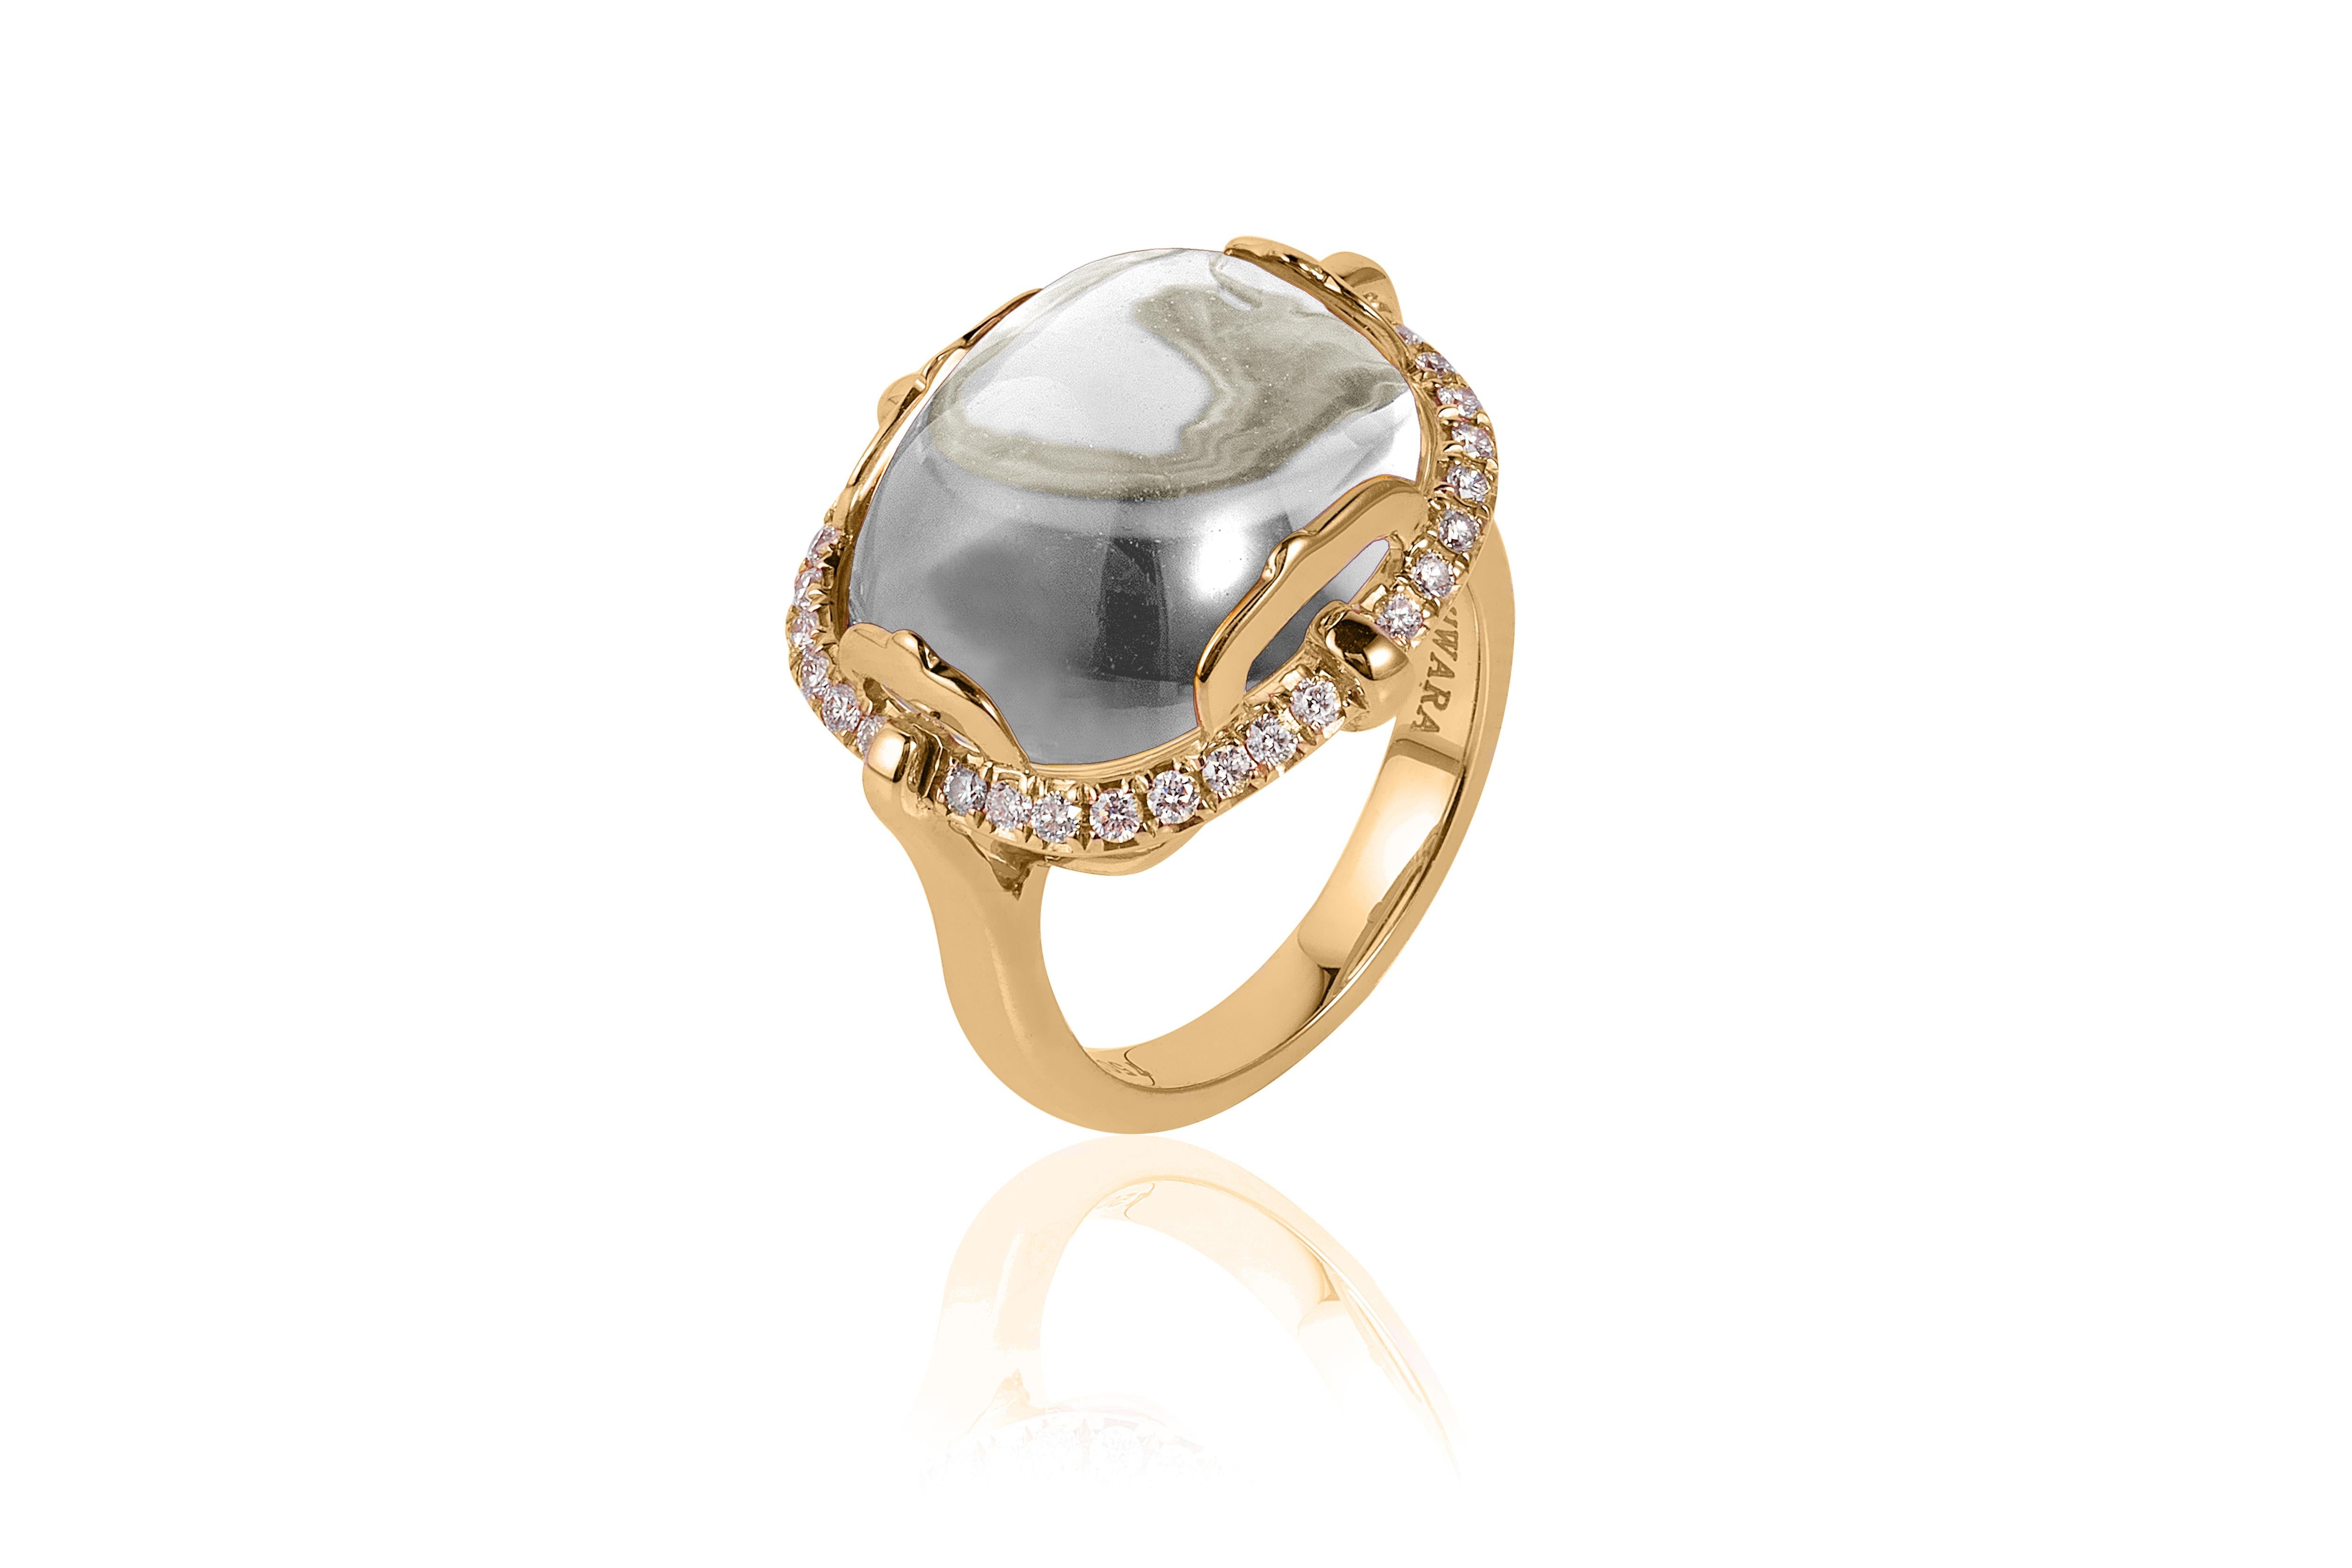 Rock Crystal Cushion Cabochon Ring in 18K Yellow Gold with Diamonds from 'Rock 'N Roll' Collection

Stone Size: 16 x 13 mm 

Gemstone Approx Wt: Rock Crystal- 13.60 Carats

Diamonds: G-H / VS, Approx Wt:0.34 Carats